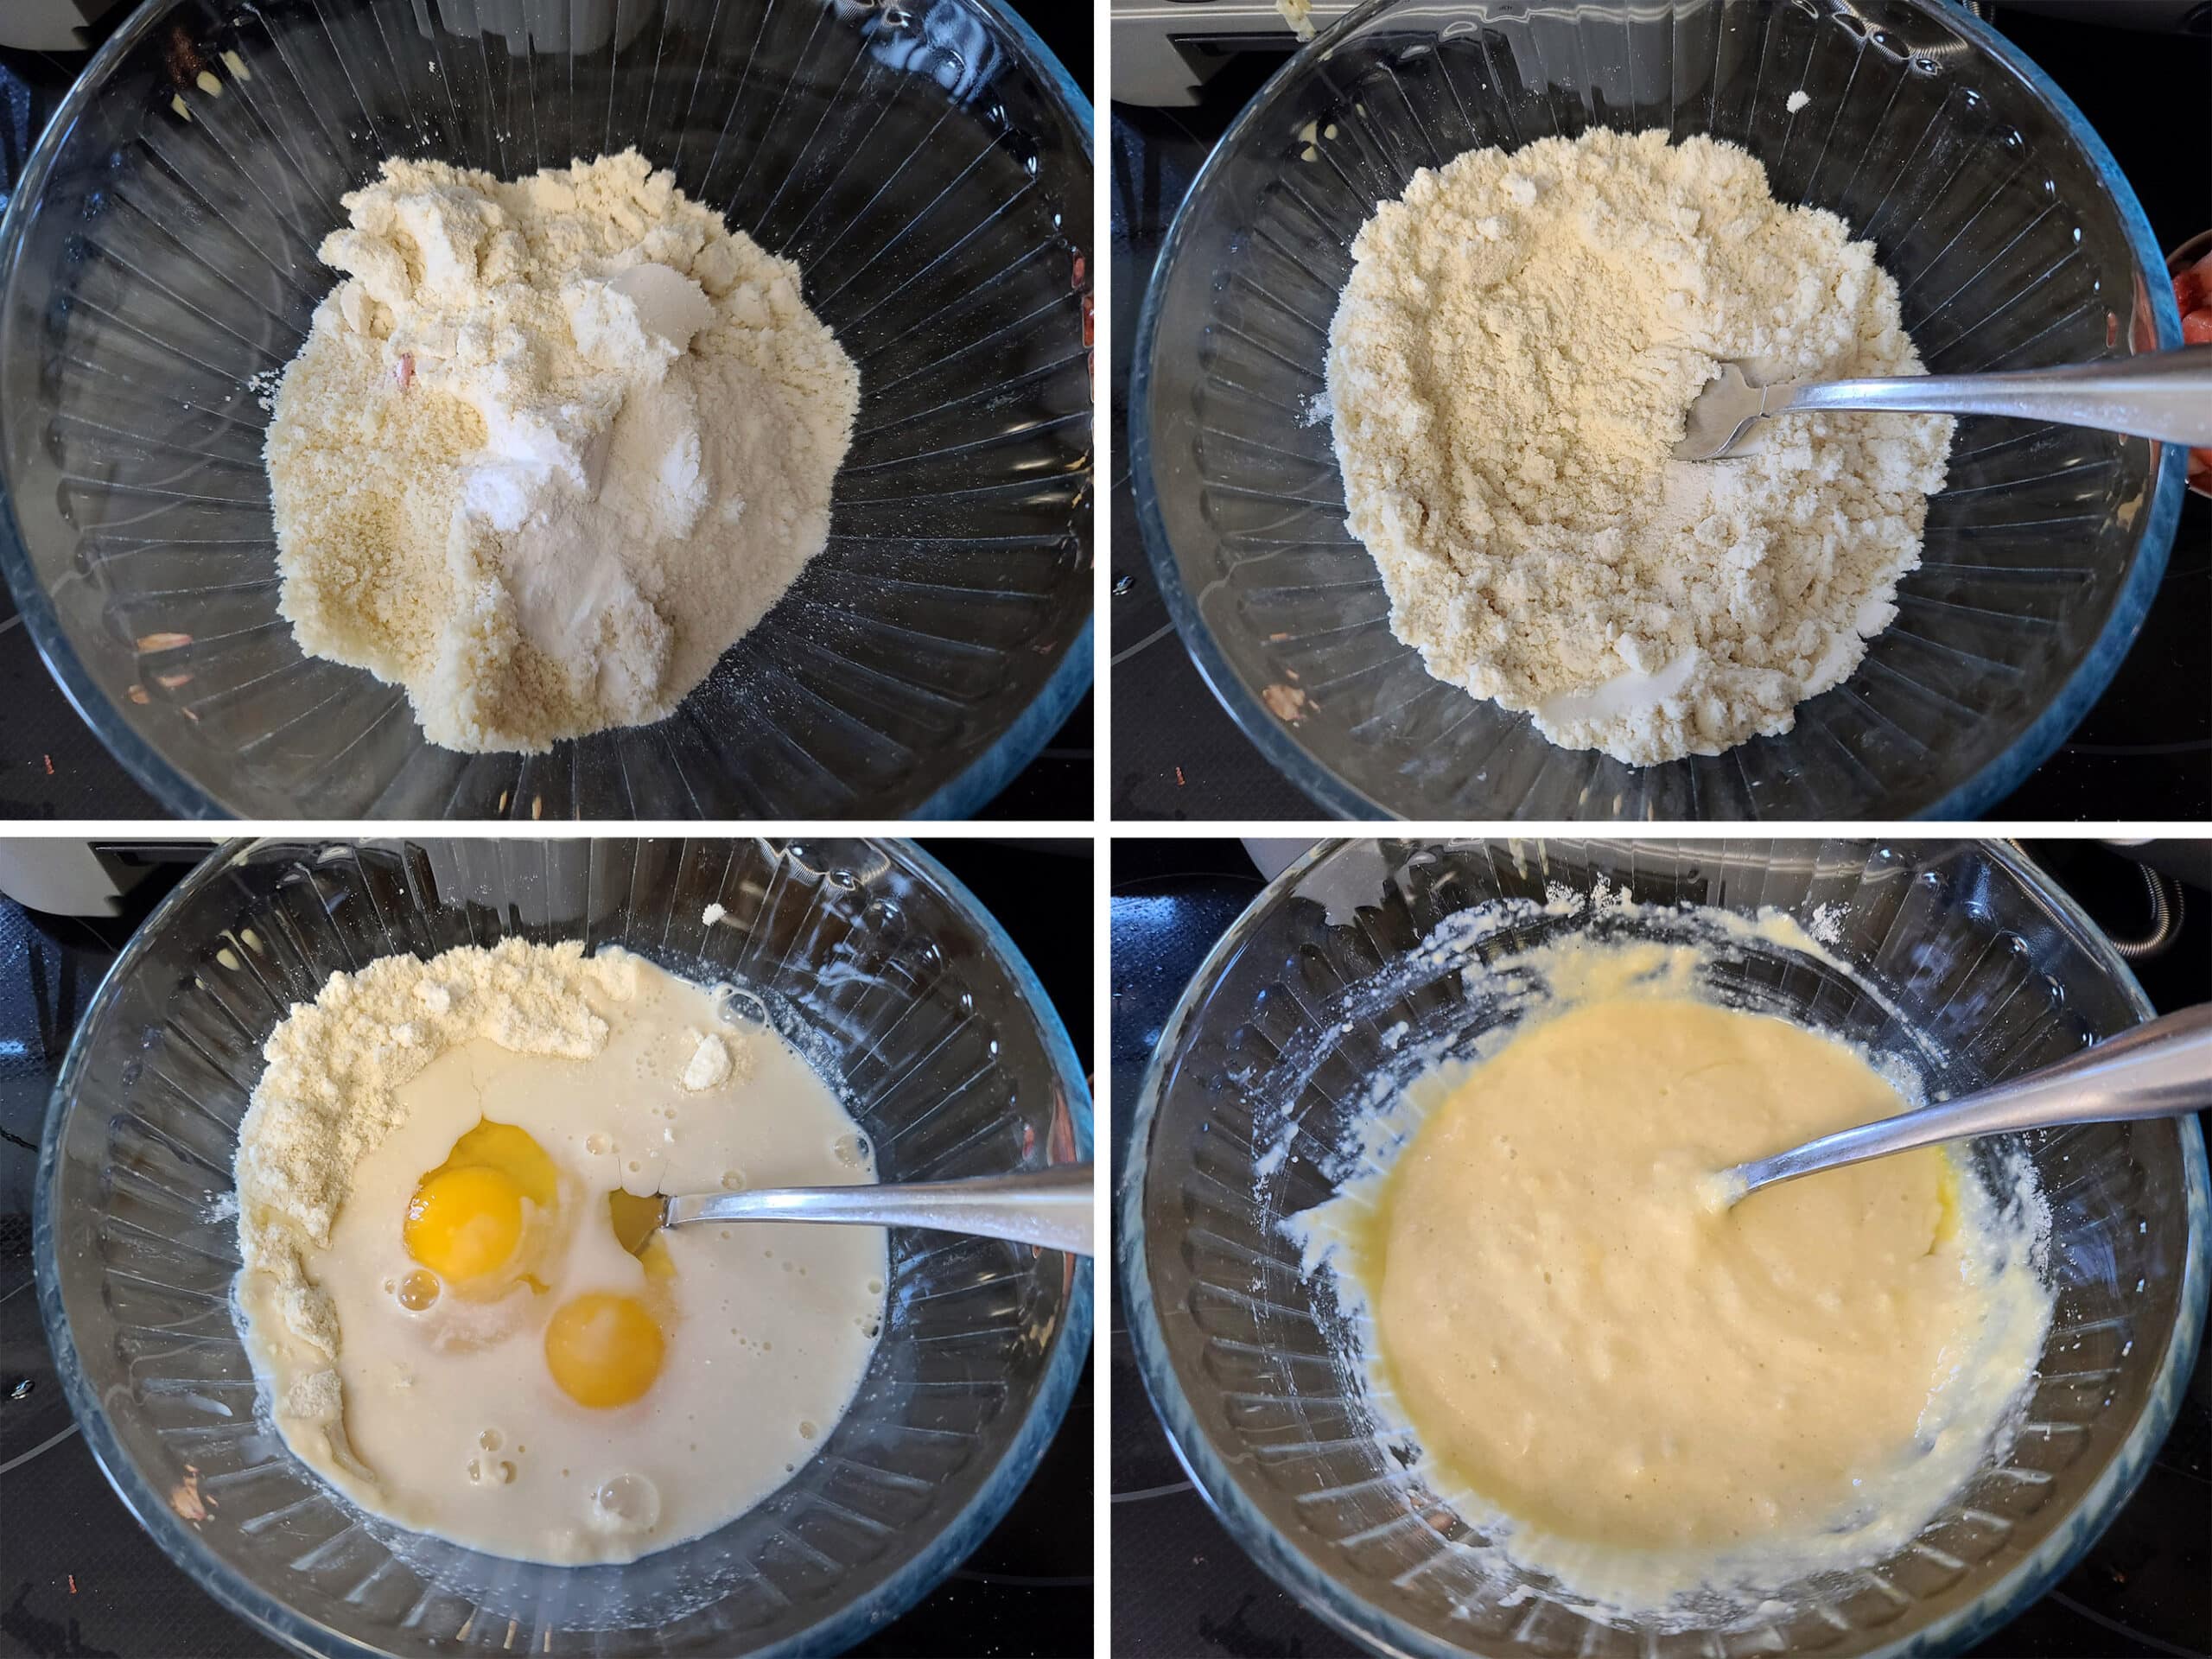 A 4 part image showing the dry ingredients being mixed together, the eggs and milk being added, and everything stirred together into a yellow batter,